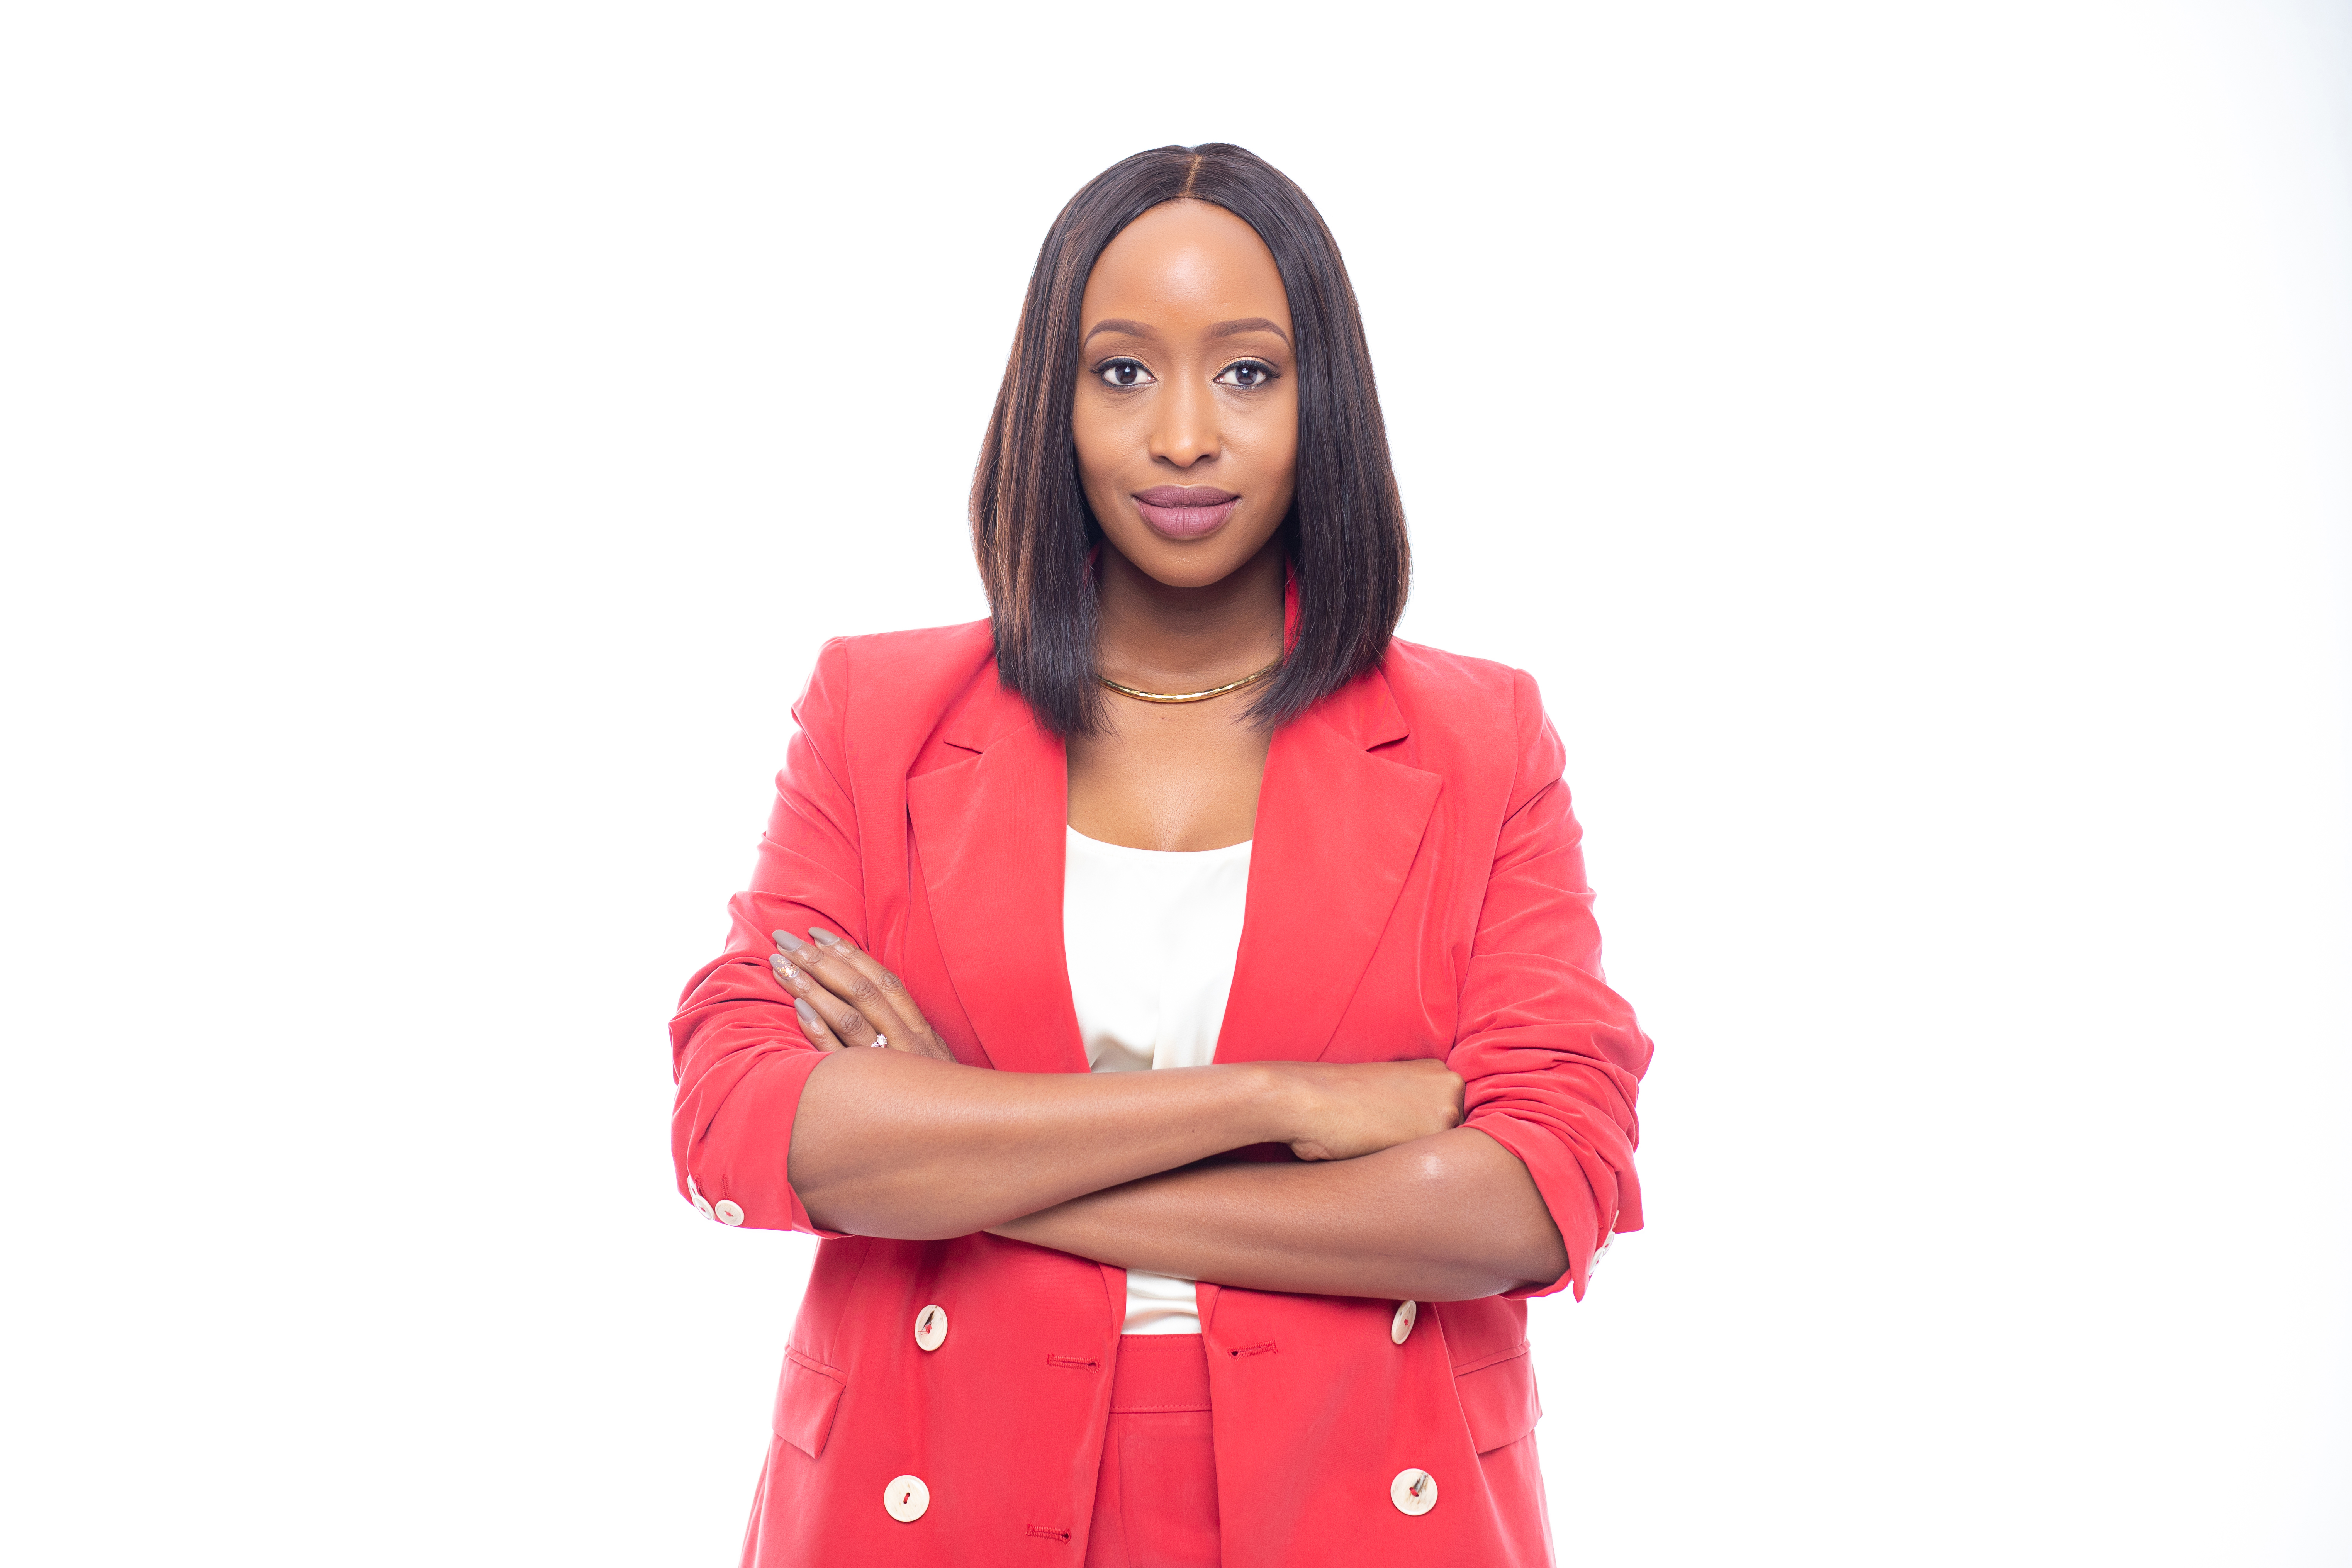 Janet Mbugua has stepped away from the media and into social justice, she now heads the Inua Dada Foundation and uses her digital platforms to expand the conversation on period poverty and gender-based violence. Photo: Janet Mbugua